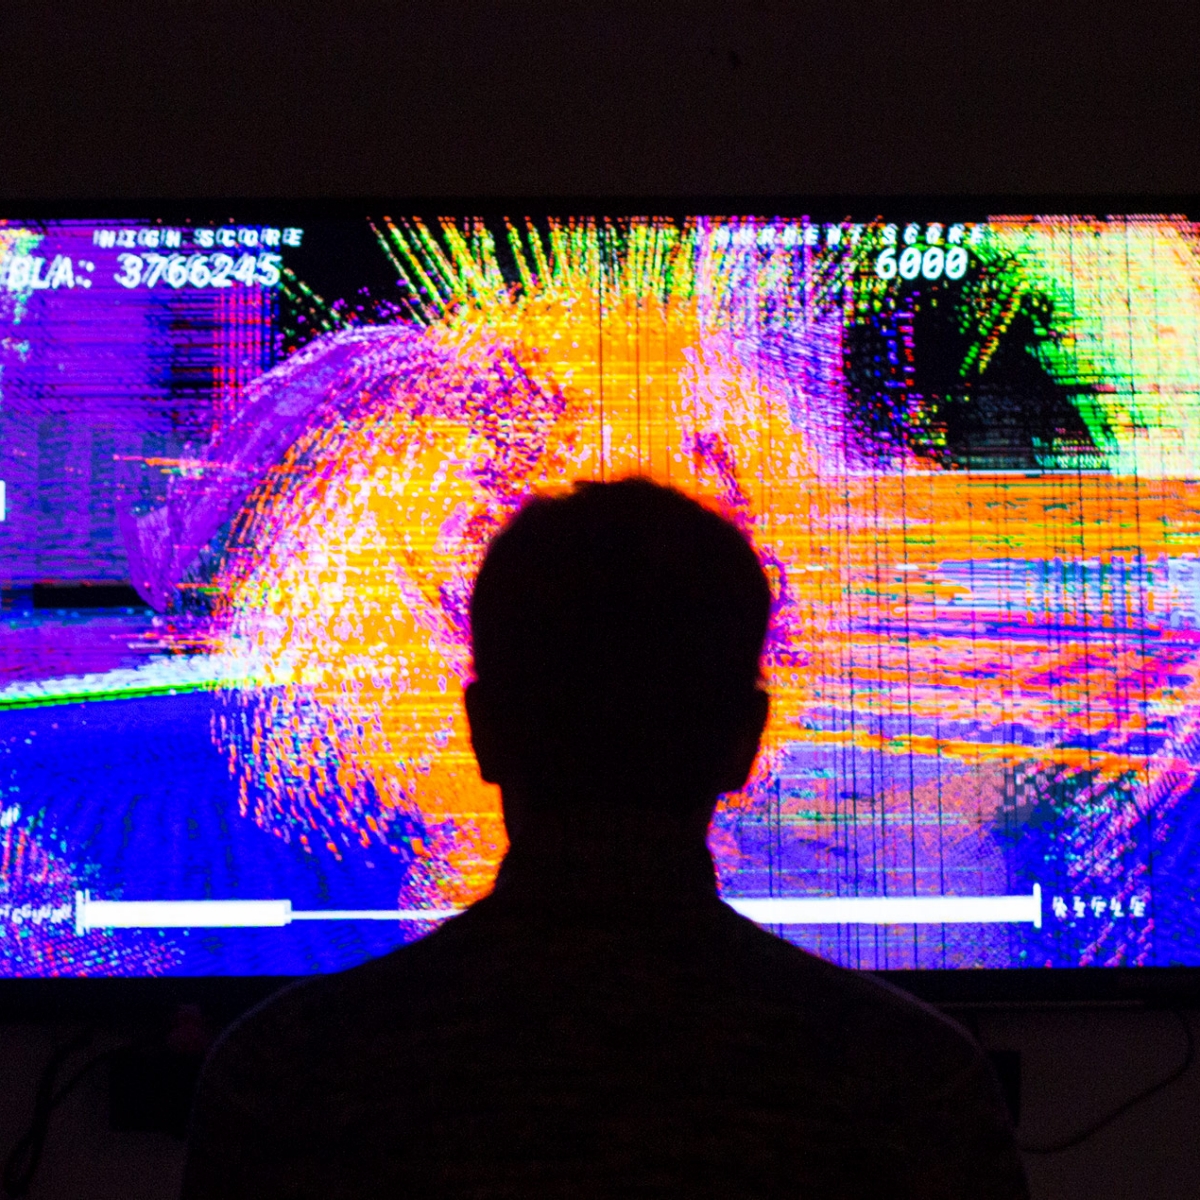 Player stands in front of glitch art game.